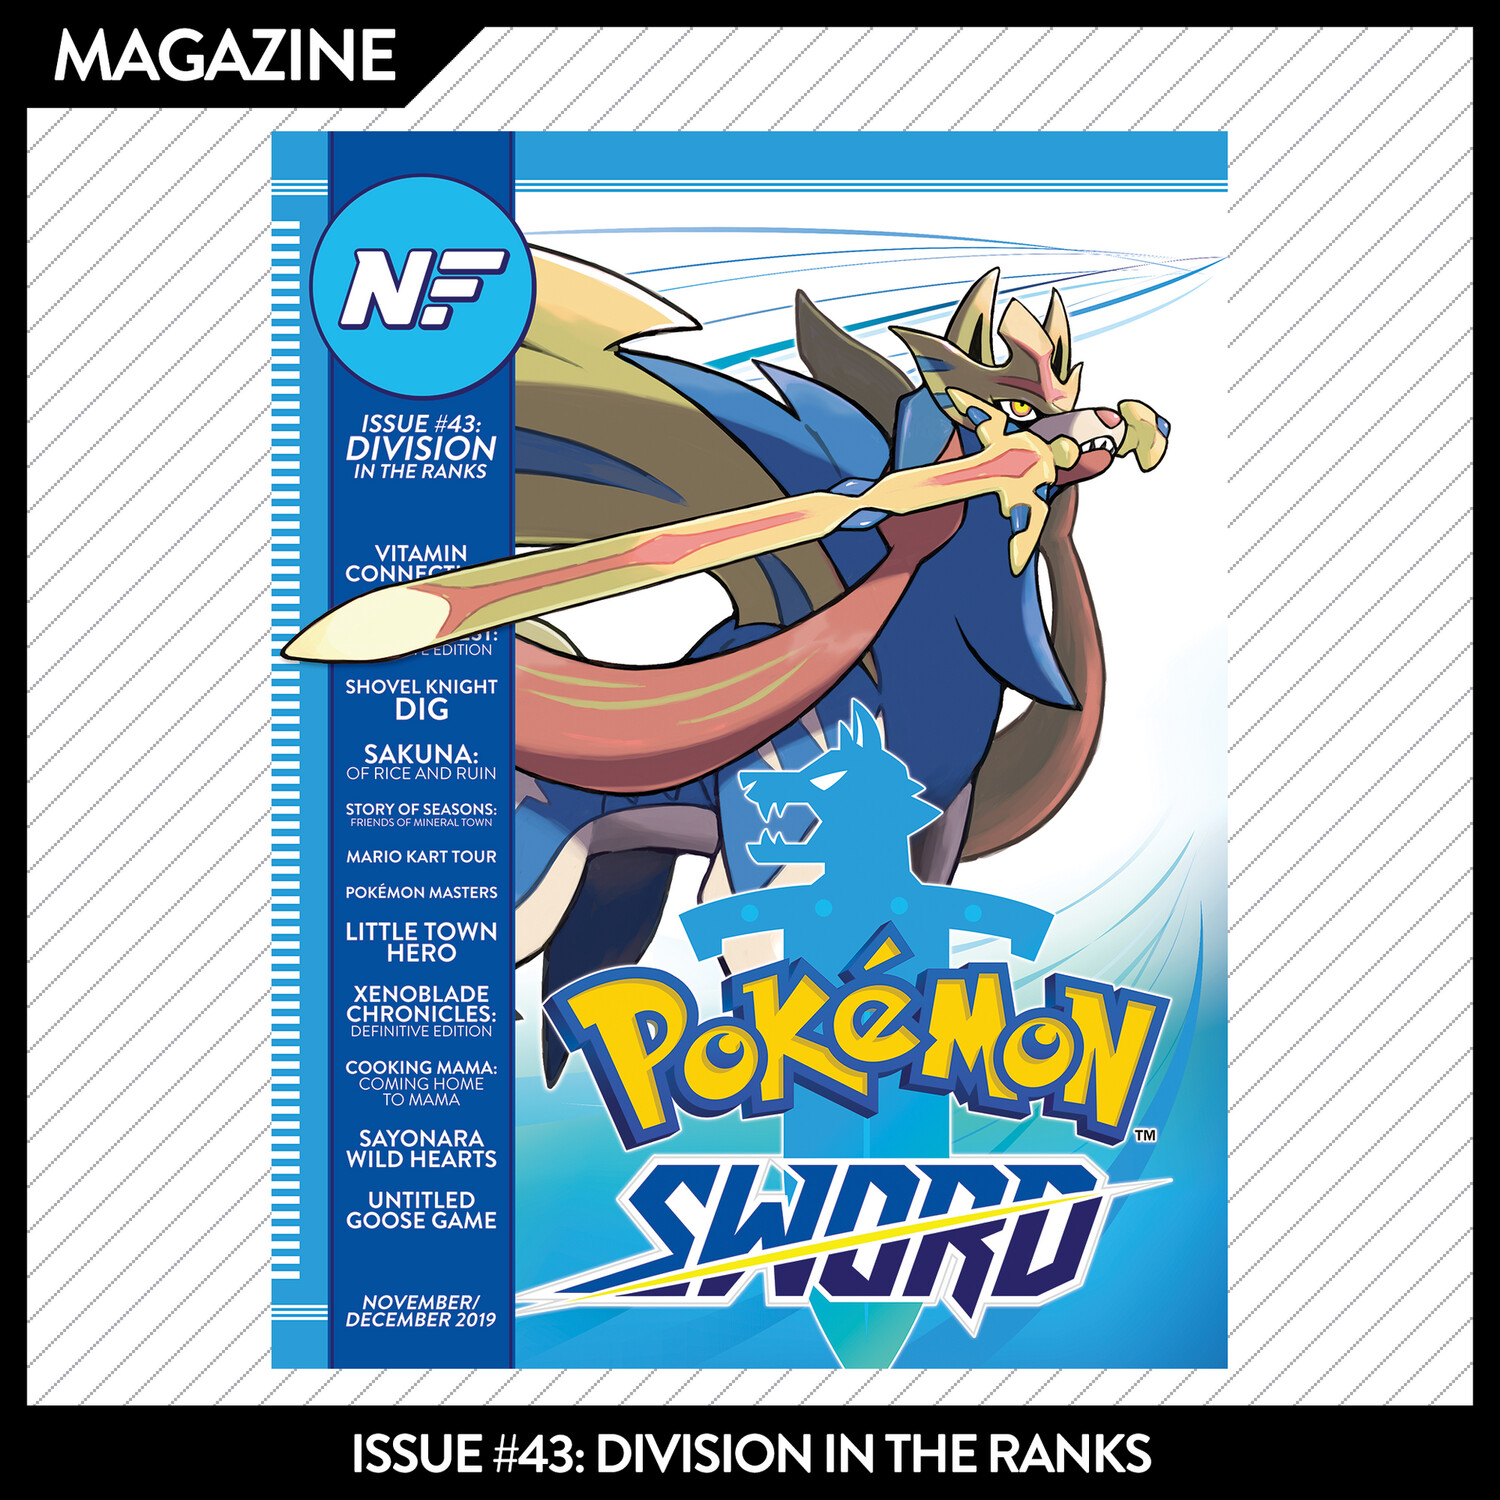 Issue #43: Division in the Ranks – November/December 2019